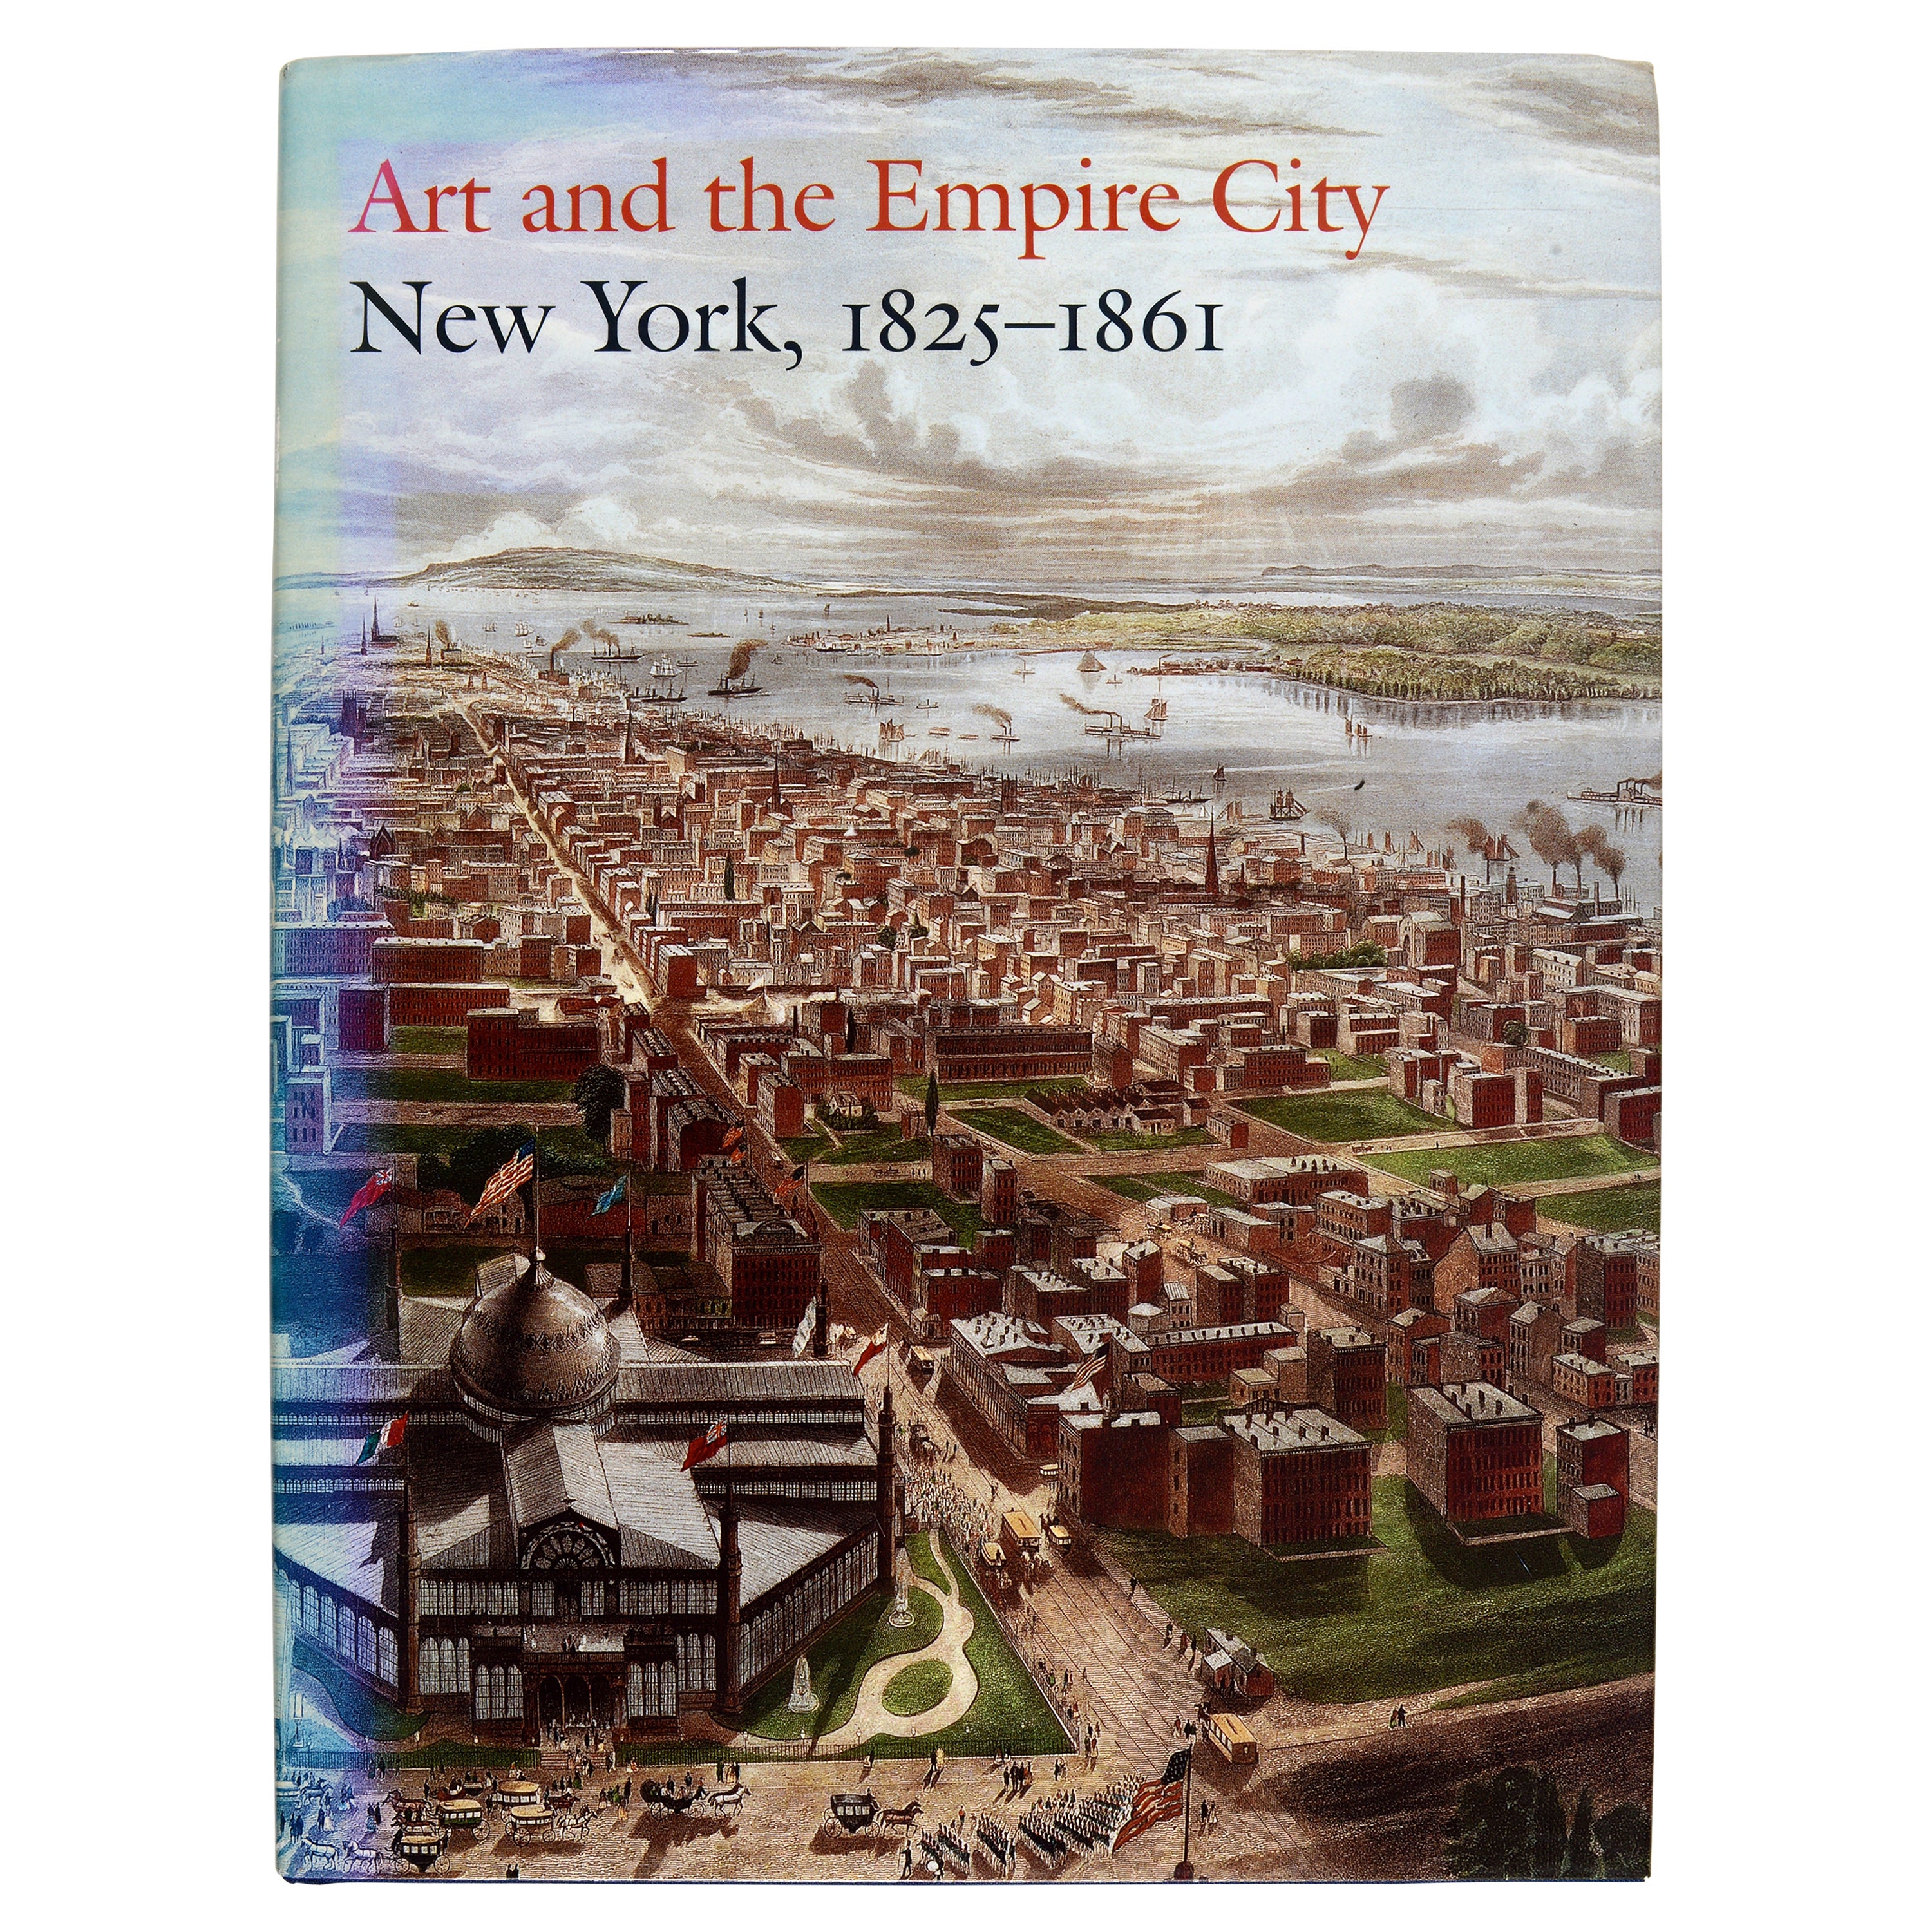 Art and the Empire City New York, 1825-1861, by Dell Upton, 1st Ed